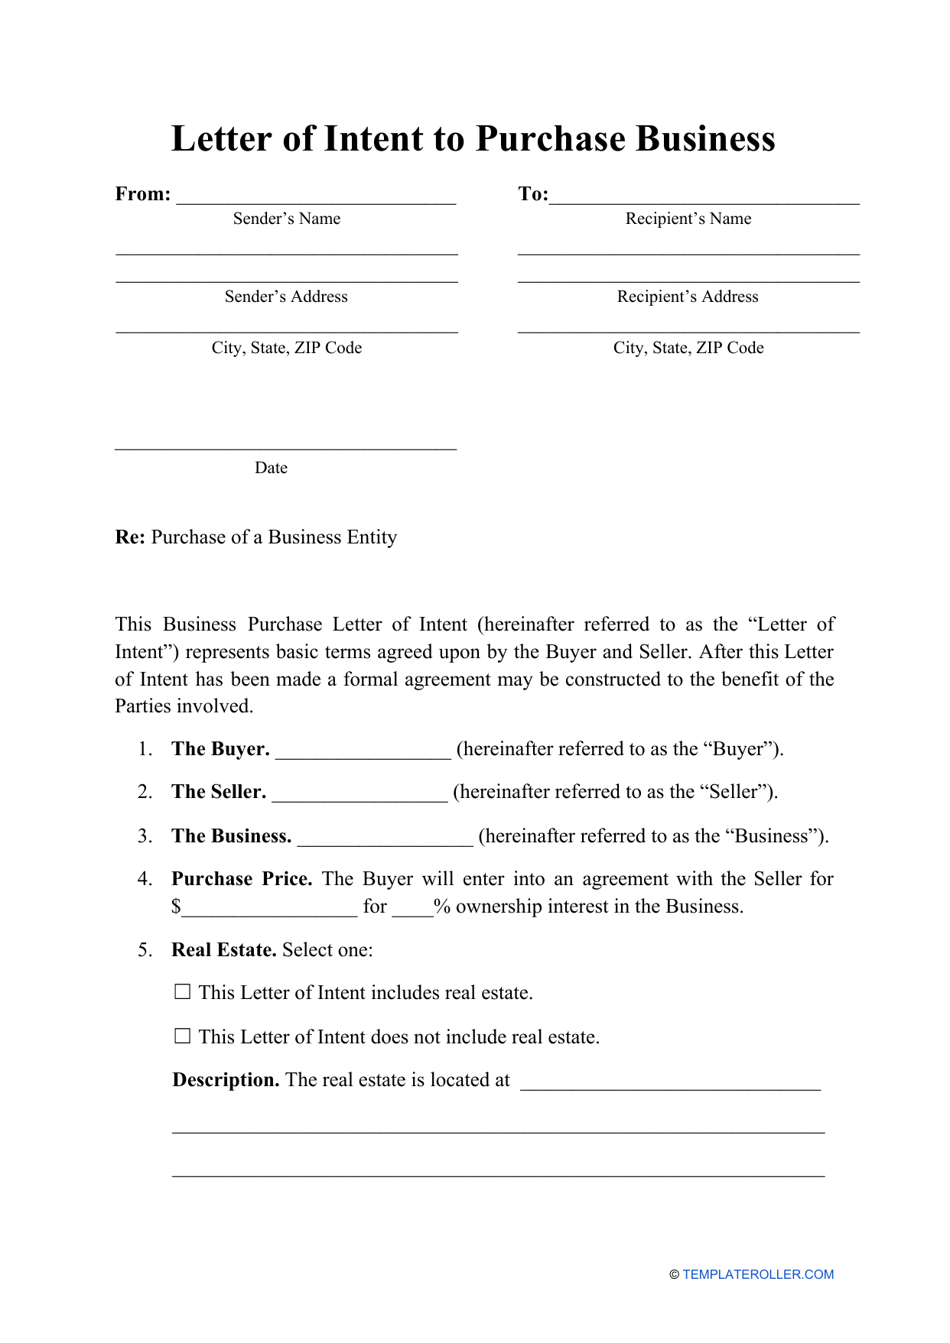 Letter of Intent to Purchase Business Template, Page 1